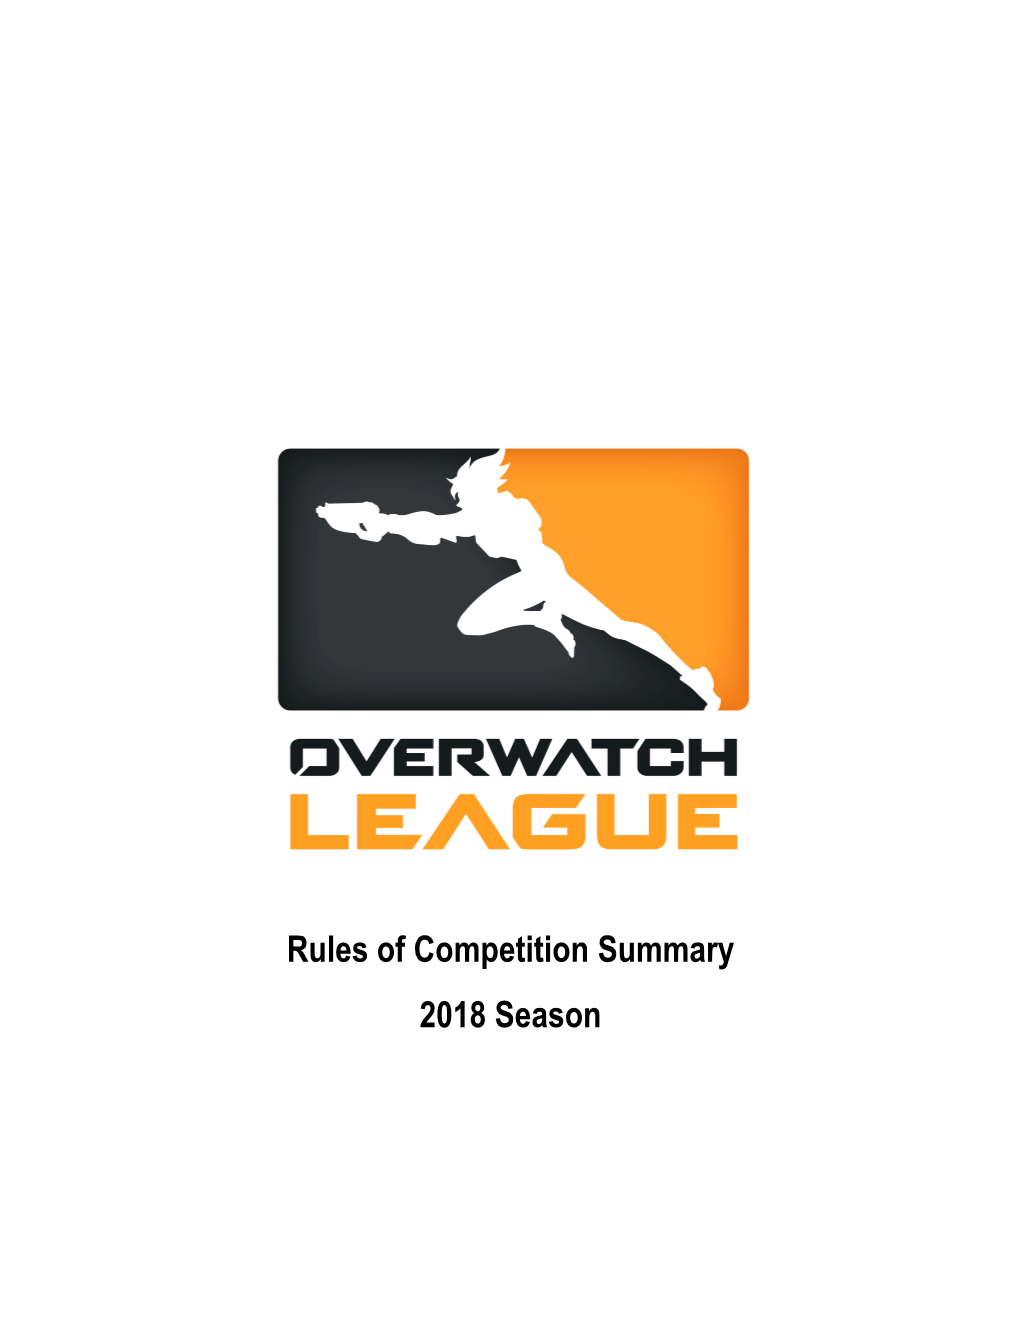 Overwatch League Rules of Competition Summary